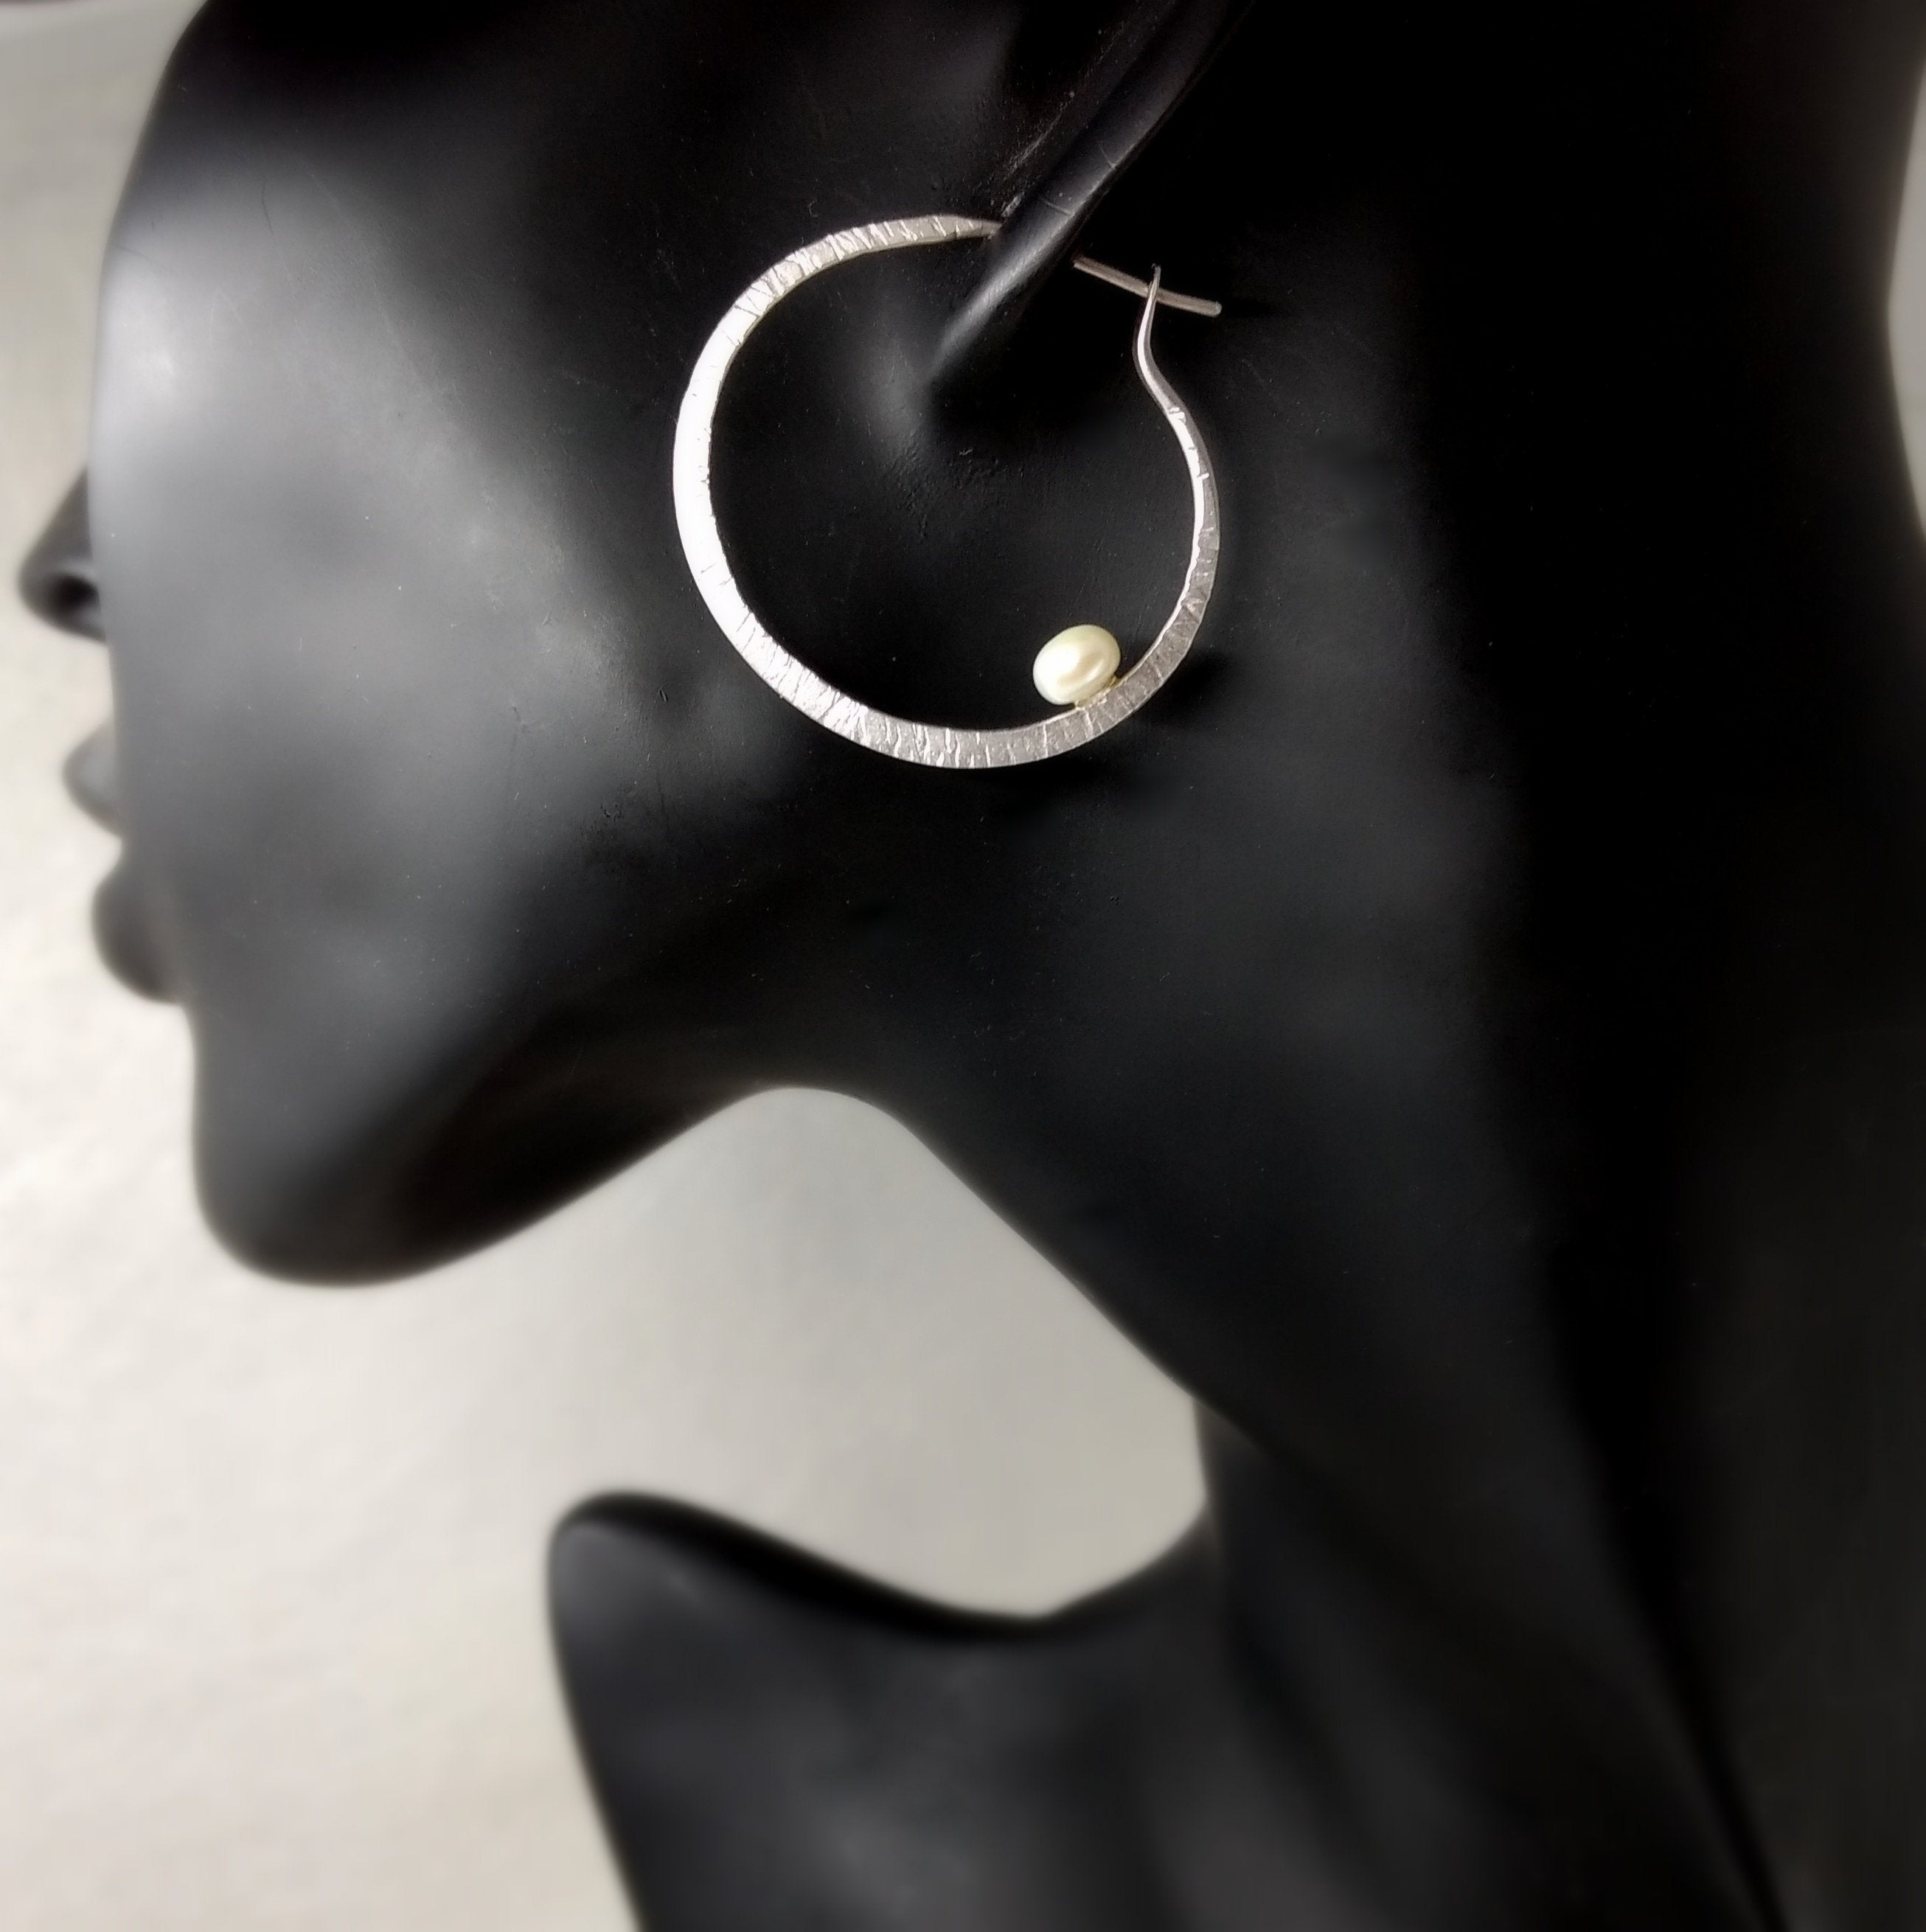 LaLune - small Sterling Silver hoops with pearl, available in 3 finishes